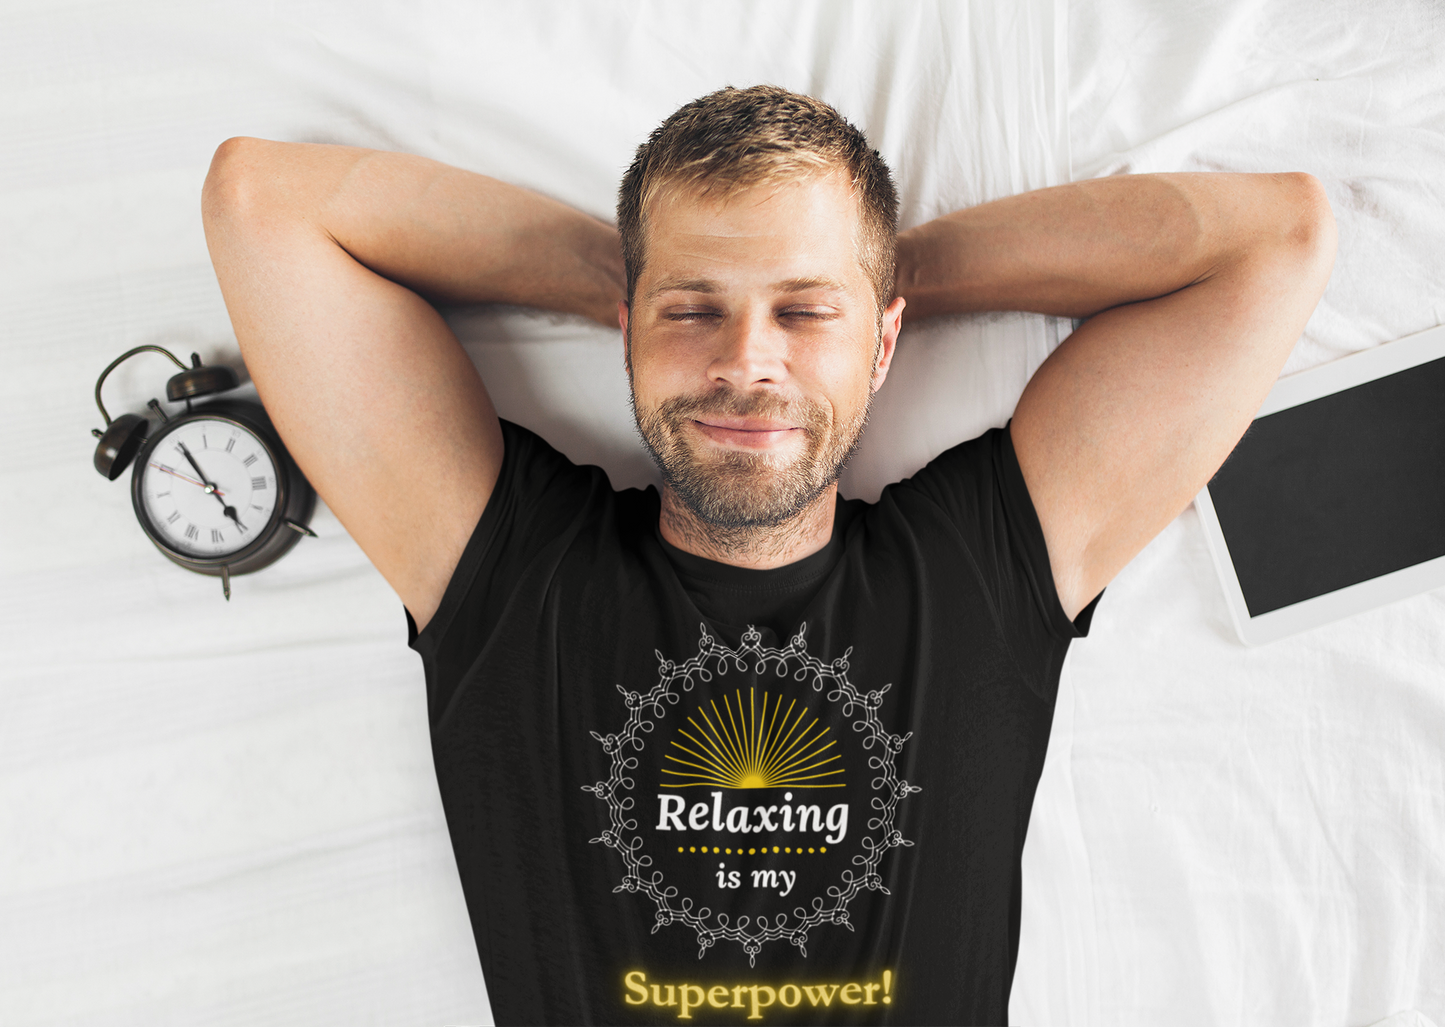 Relaxing is my superpower! Inspirational tee. 100% soft cotton